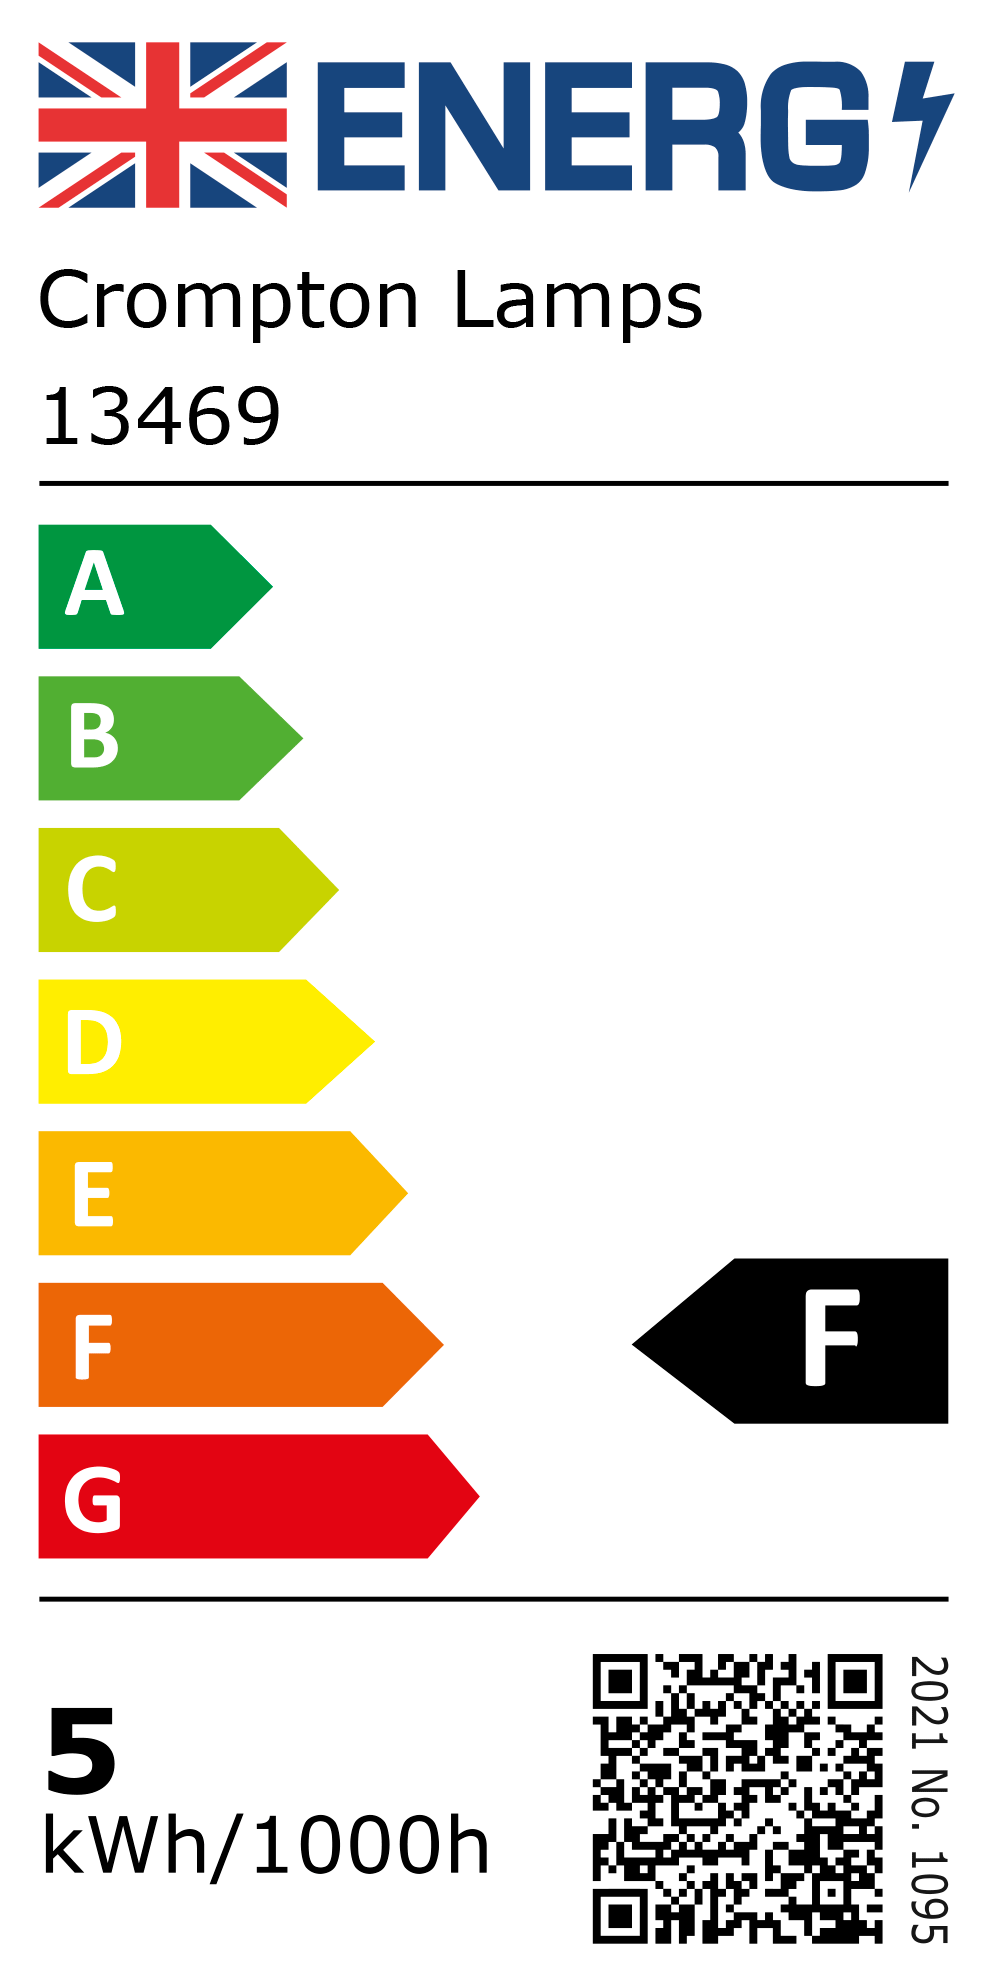 New 2021 Energy Rating Label: Stock Code 13469